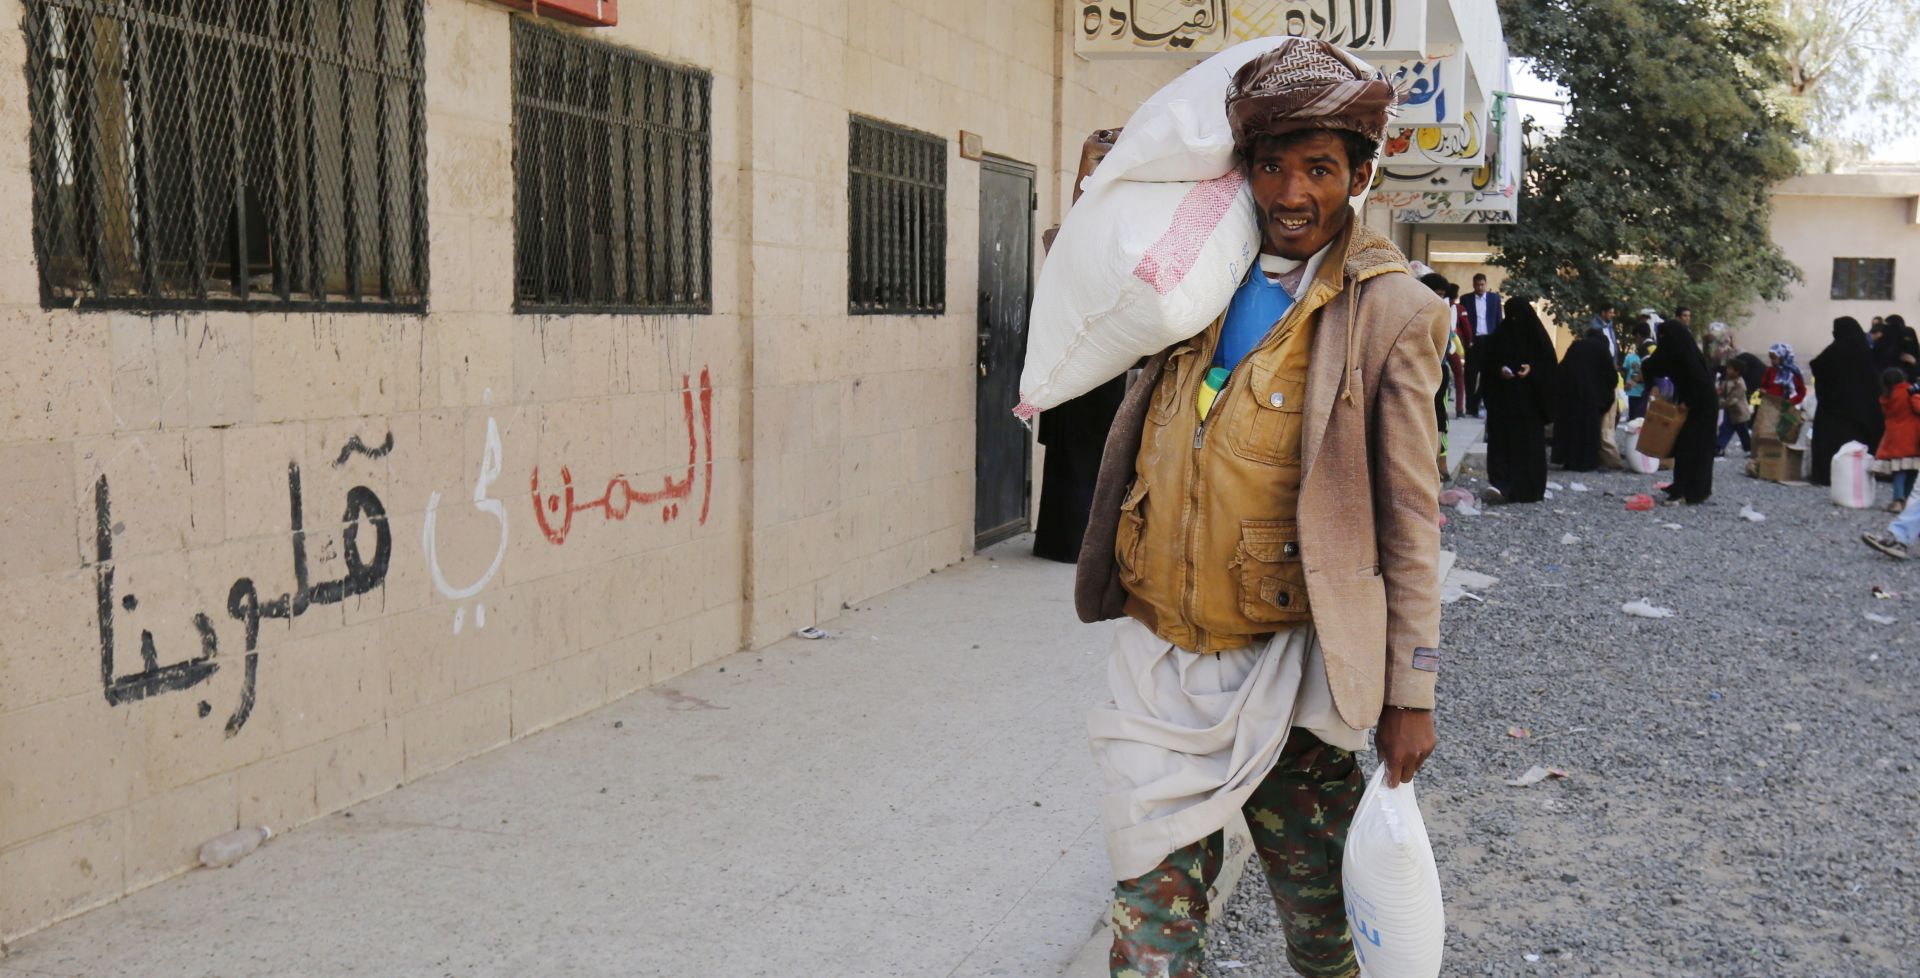 epa07373128 A conflict-affected Yemeni man passing a building with the words in Arabic ‘Yemen is in our hearts’ carries food rations provided by Mona Relief Yemen at a neighborhood in Sana'a, Yemen, 14 February 2019 (issued 15 February 2019). According to reports, the United Nations has warned that the situation in war-torn Yemen is getting even worse as a four-year long conflict between the Saudi-backed government forces and the Houthi rebels has created the worst humanitarian crisis in the world, where some 80 percent of Yemen's 26-million population are in need of humanitarian assistance.  EPA/YAHYA ARHAB